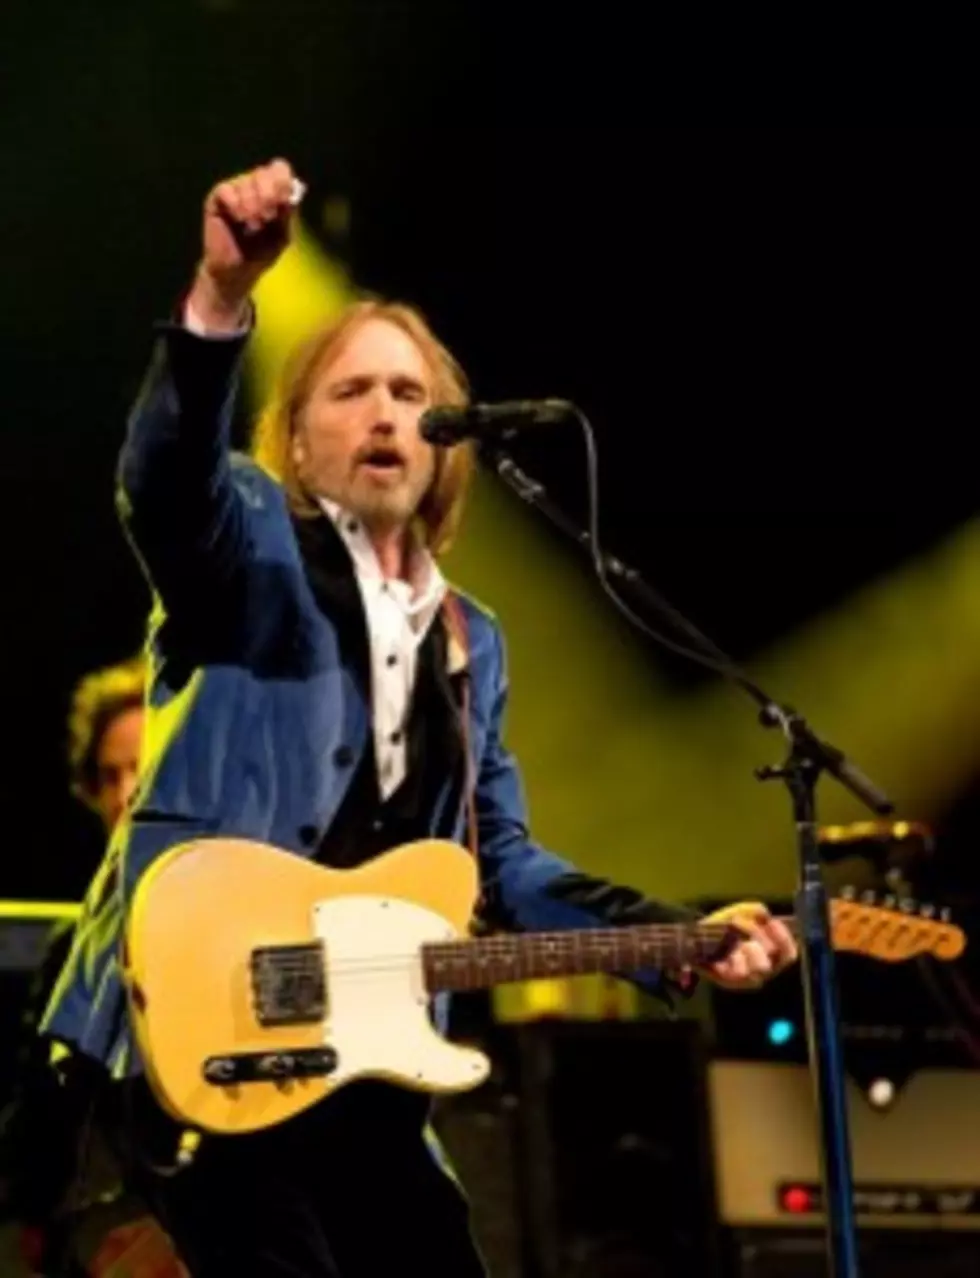 What Does Tom Petty Have in Common with Major League Baseball?